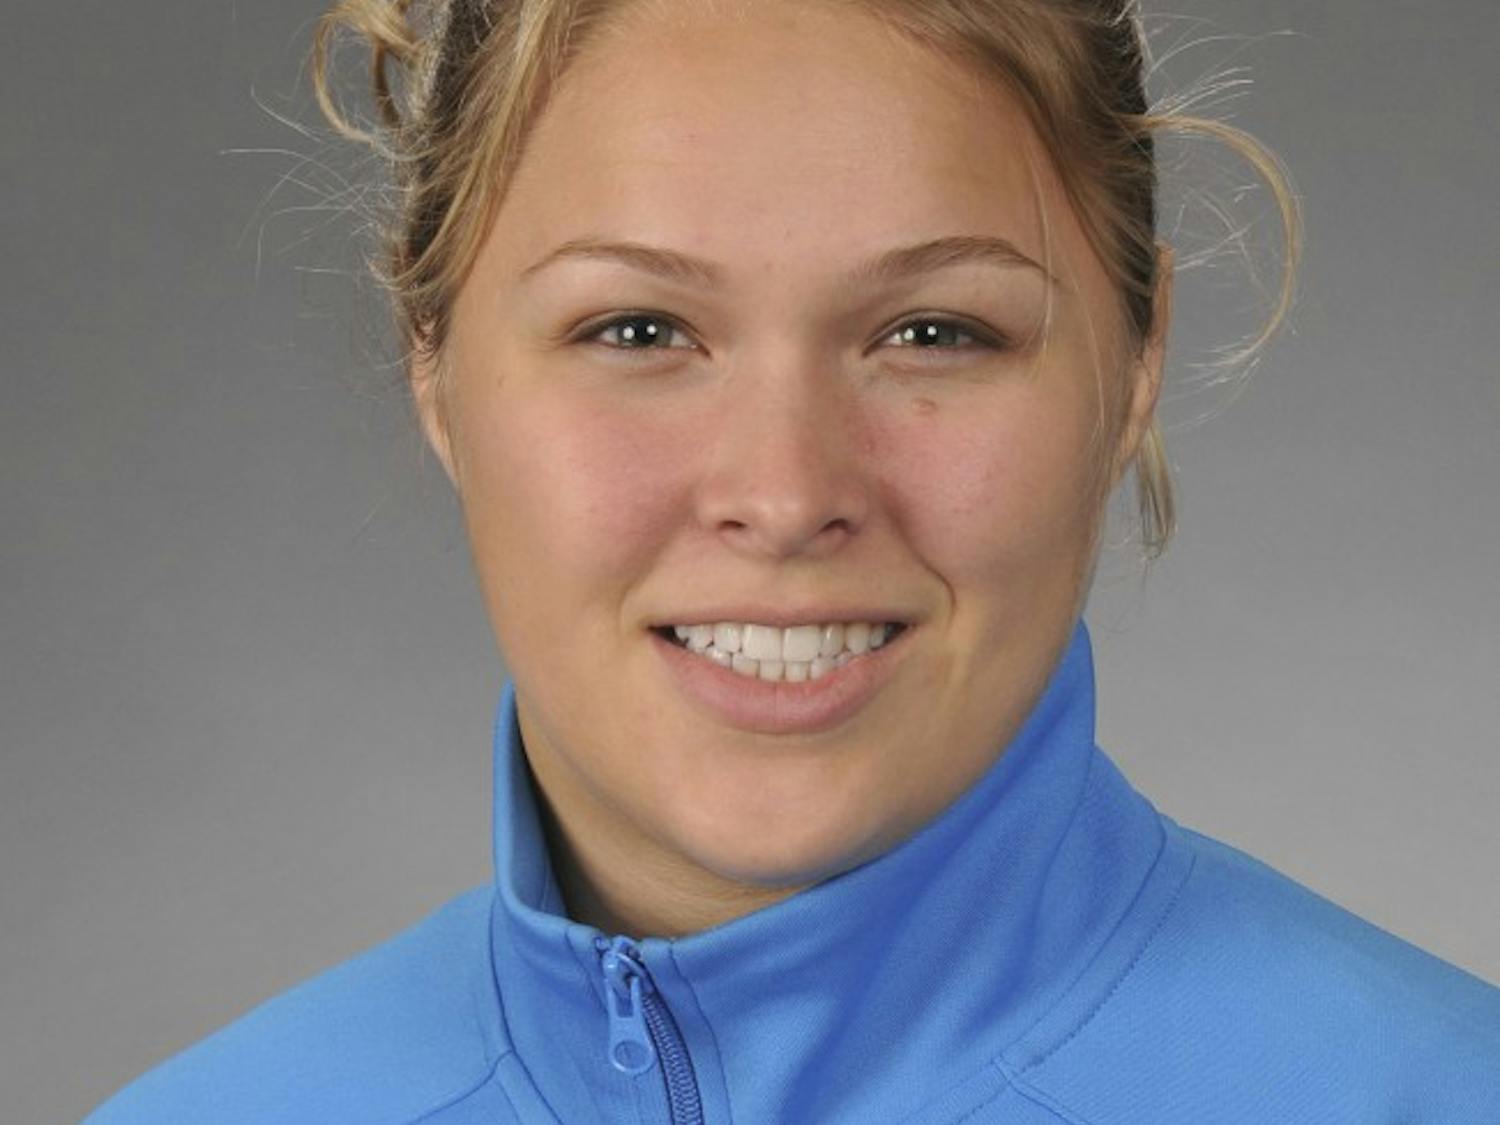 Ronda Rousey is a member of the 2008 U.S. Judo team. (USOC/MCT)